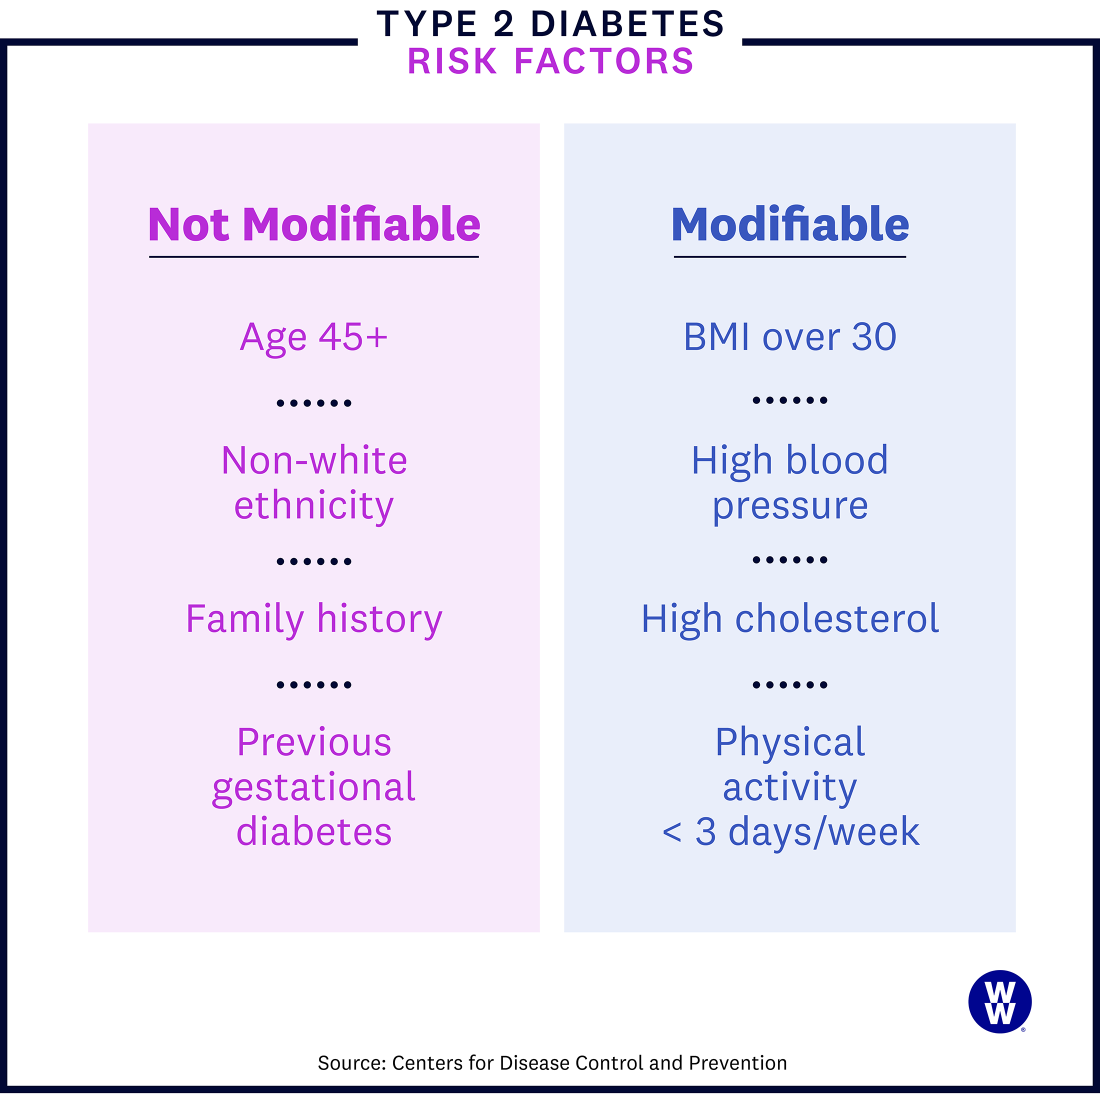 Type 2 diabetes risk factors infographic: Not modifiable; age 45+, non-white ethnicity, family history, previous gestational diabetes. Modifiable; BMI over 30, high blood pressure, high cholesterol, physical activity less than 3 days a week.